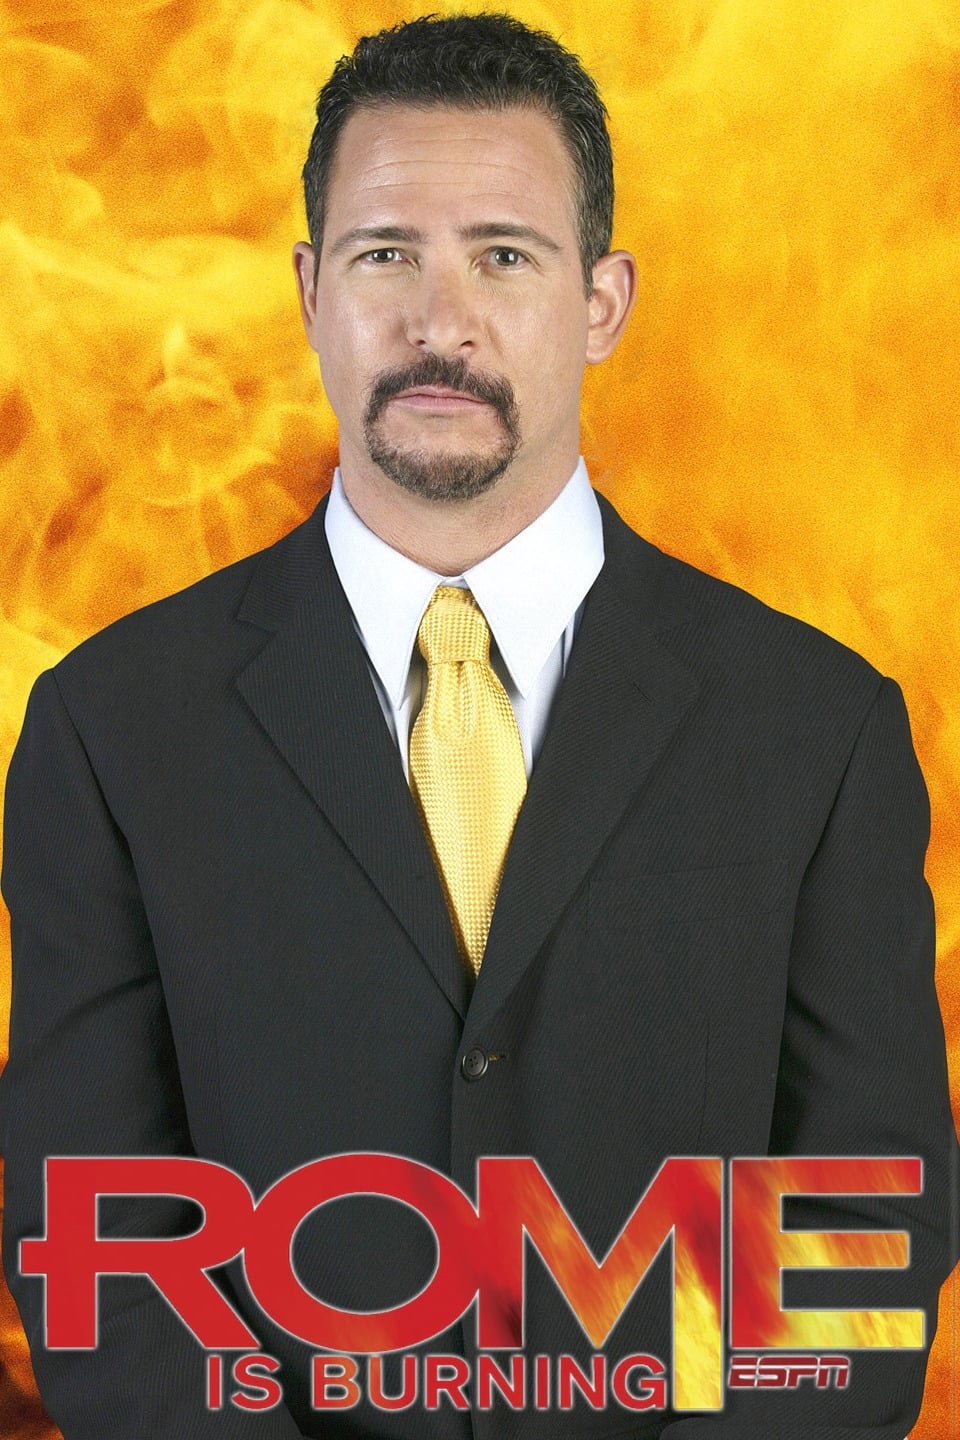 Jim Rome Is Burning TV Shows About Professional Sports